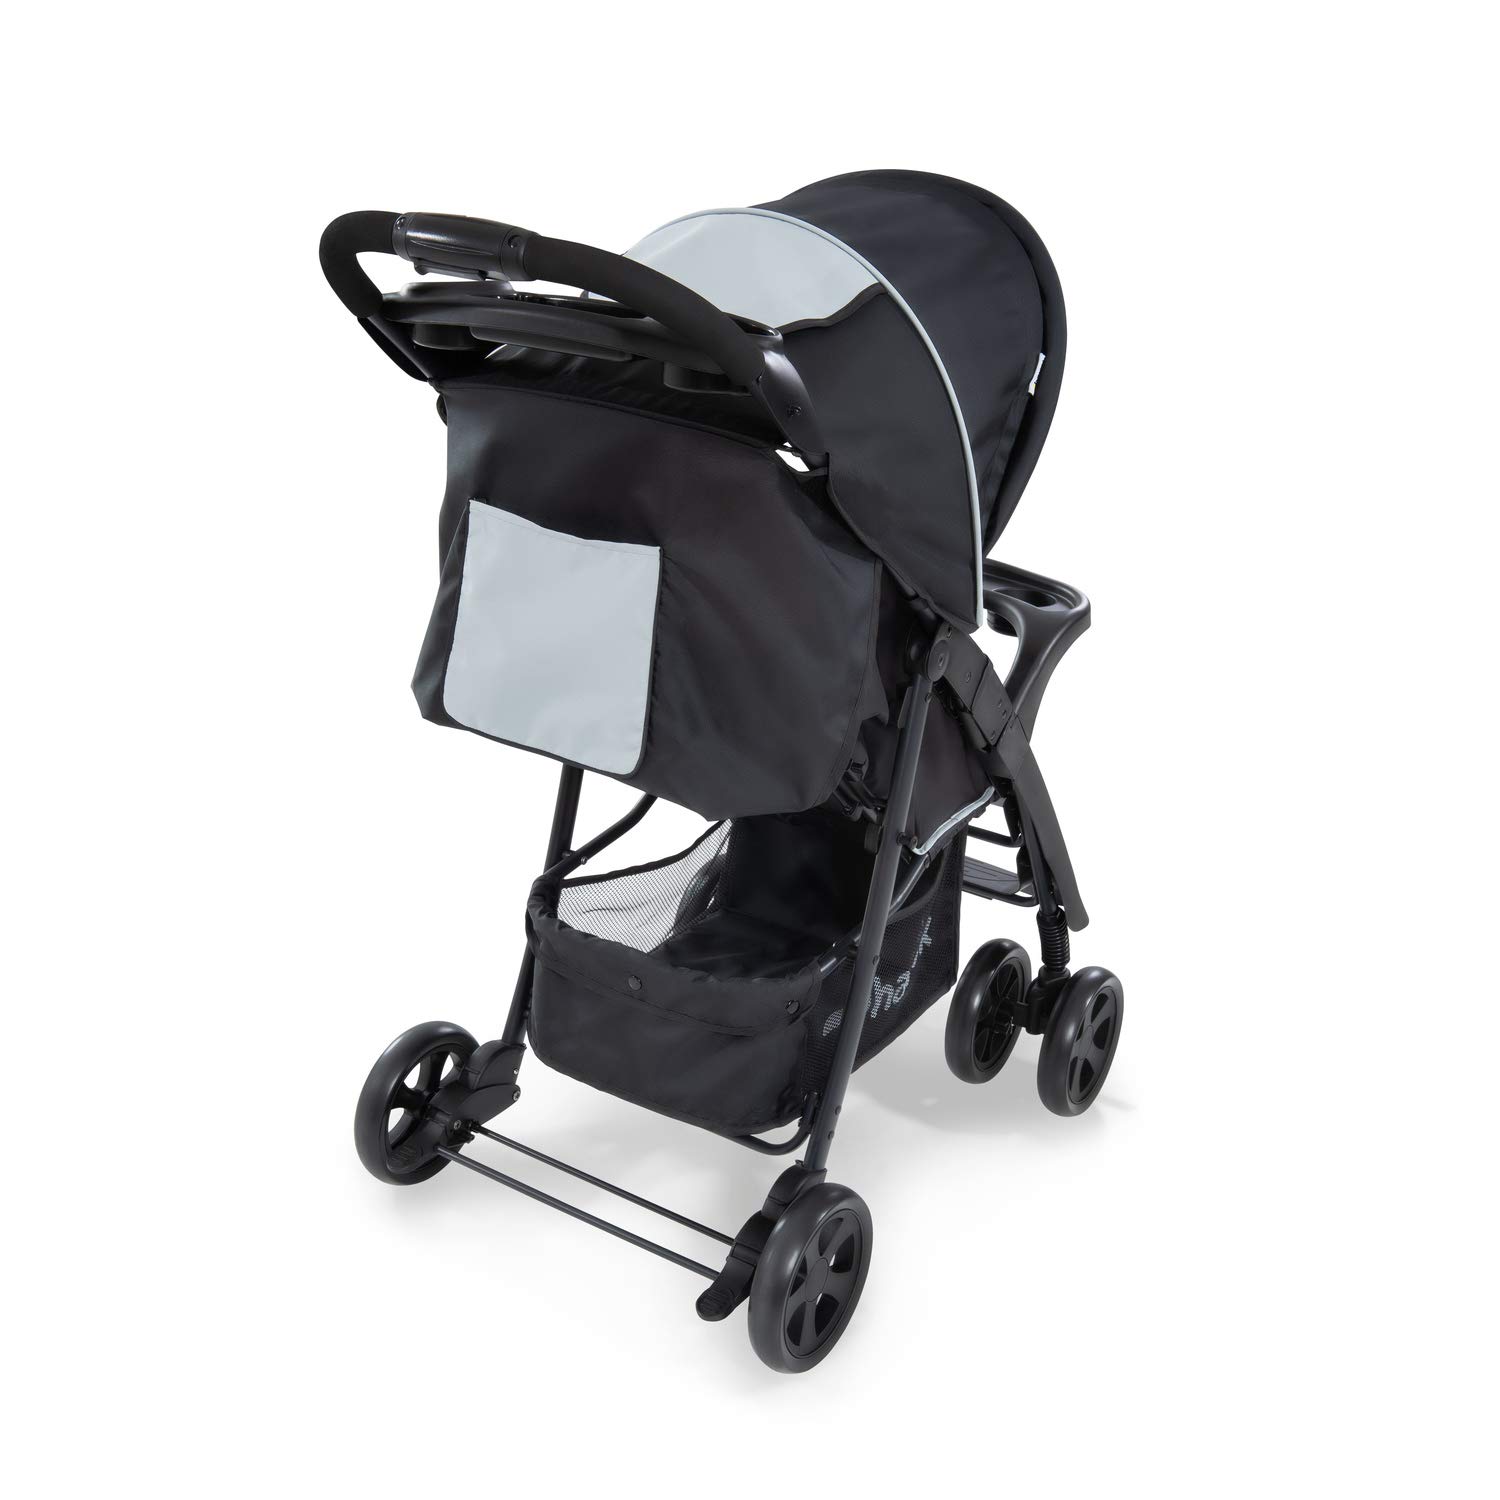 Hauck Shopper Neo II Buggy with Reclining Function Small Foldable One-Hand Folding Mechanism Light from Birth to 25 kg, Drinks Holder